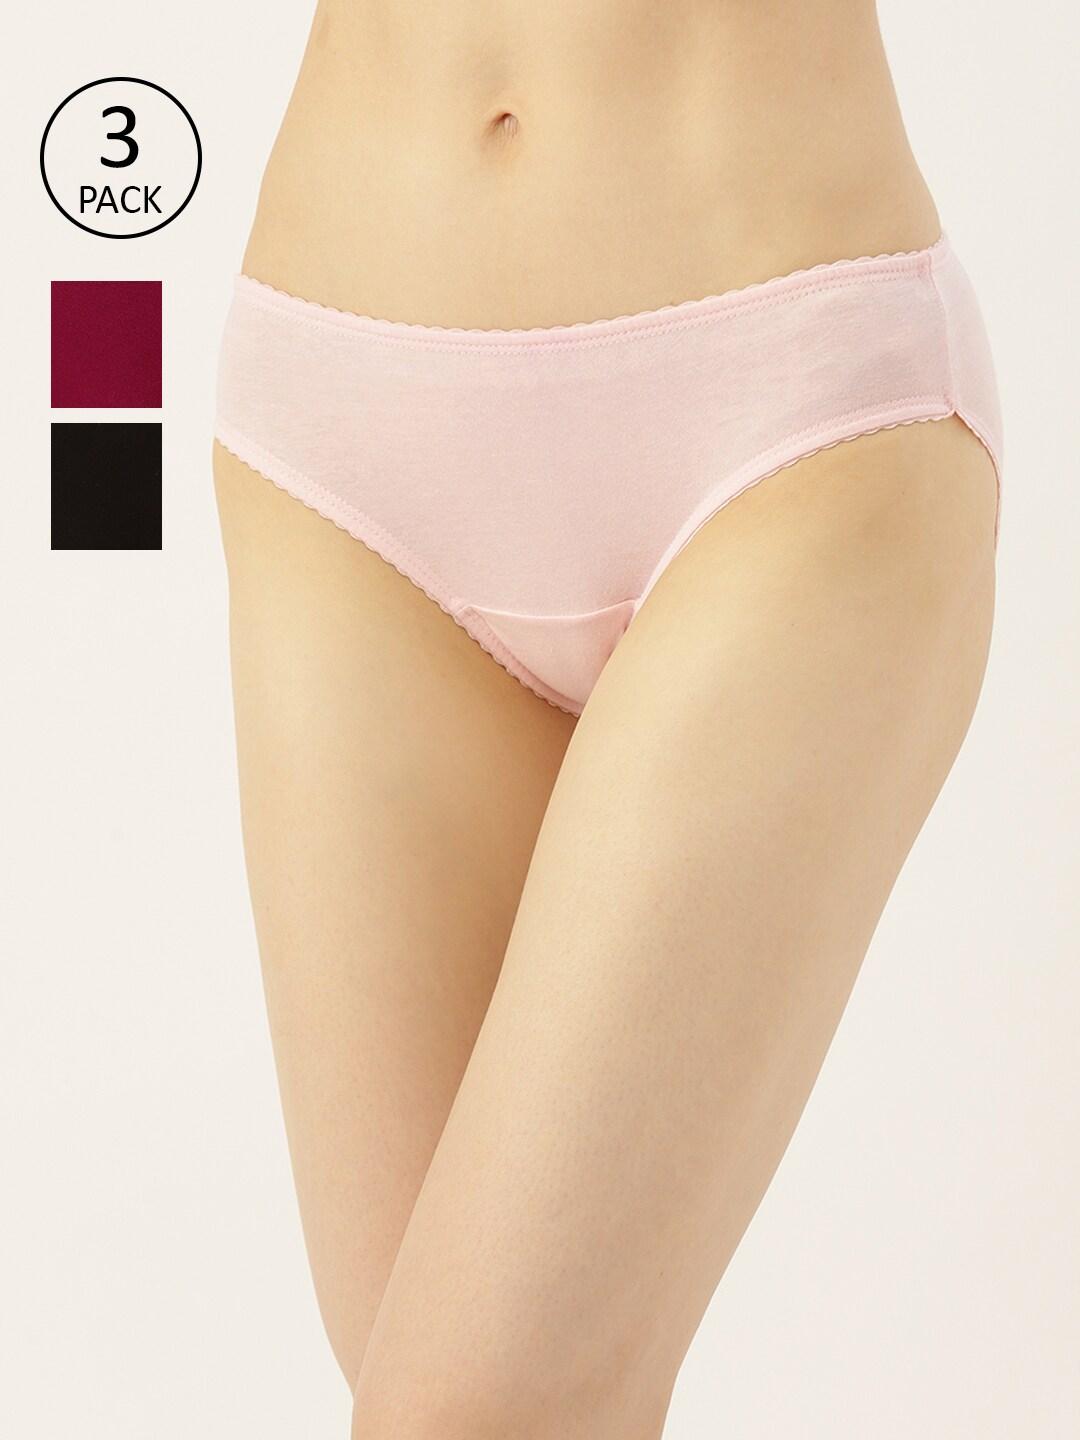 dressberry-women-pack-of-3-pure-cotton-solid-basic-briefs-db-3xs-sol-brf-003